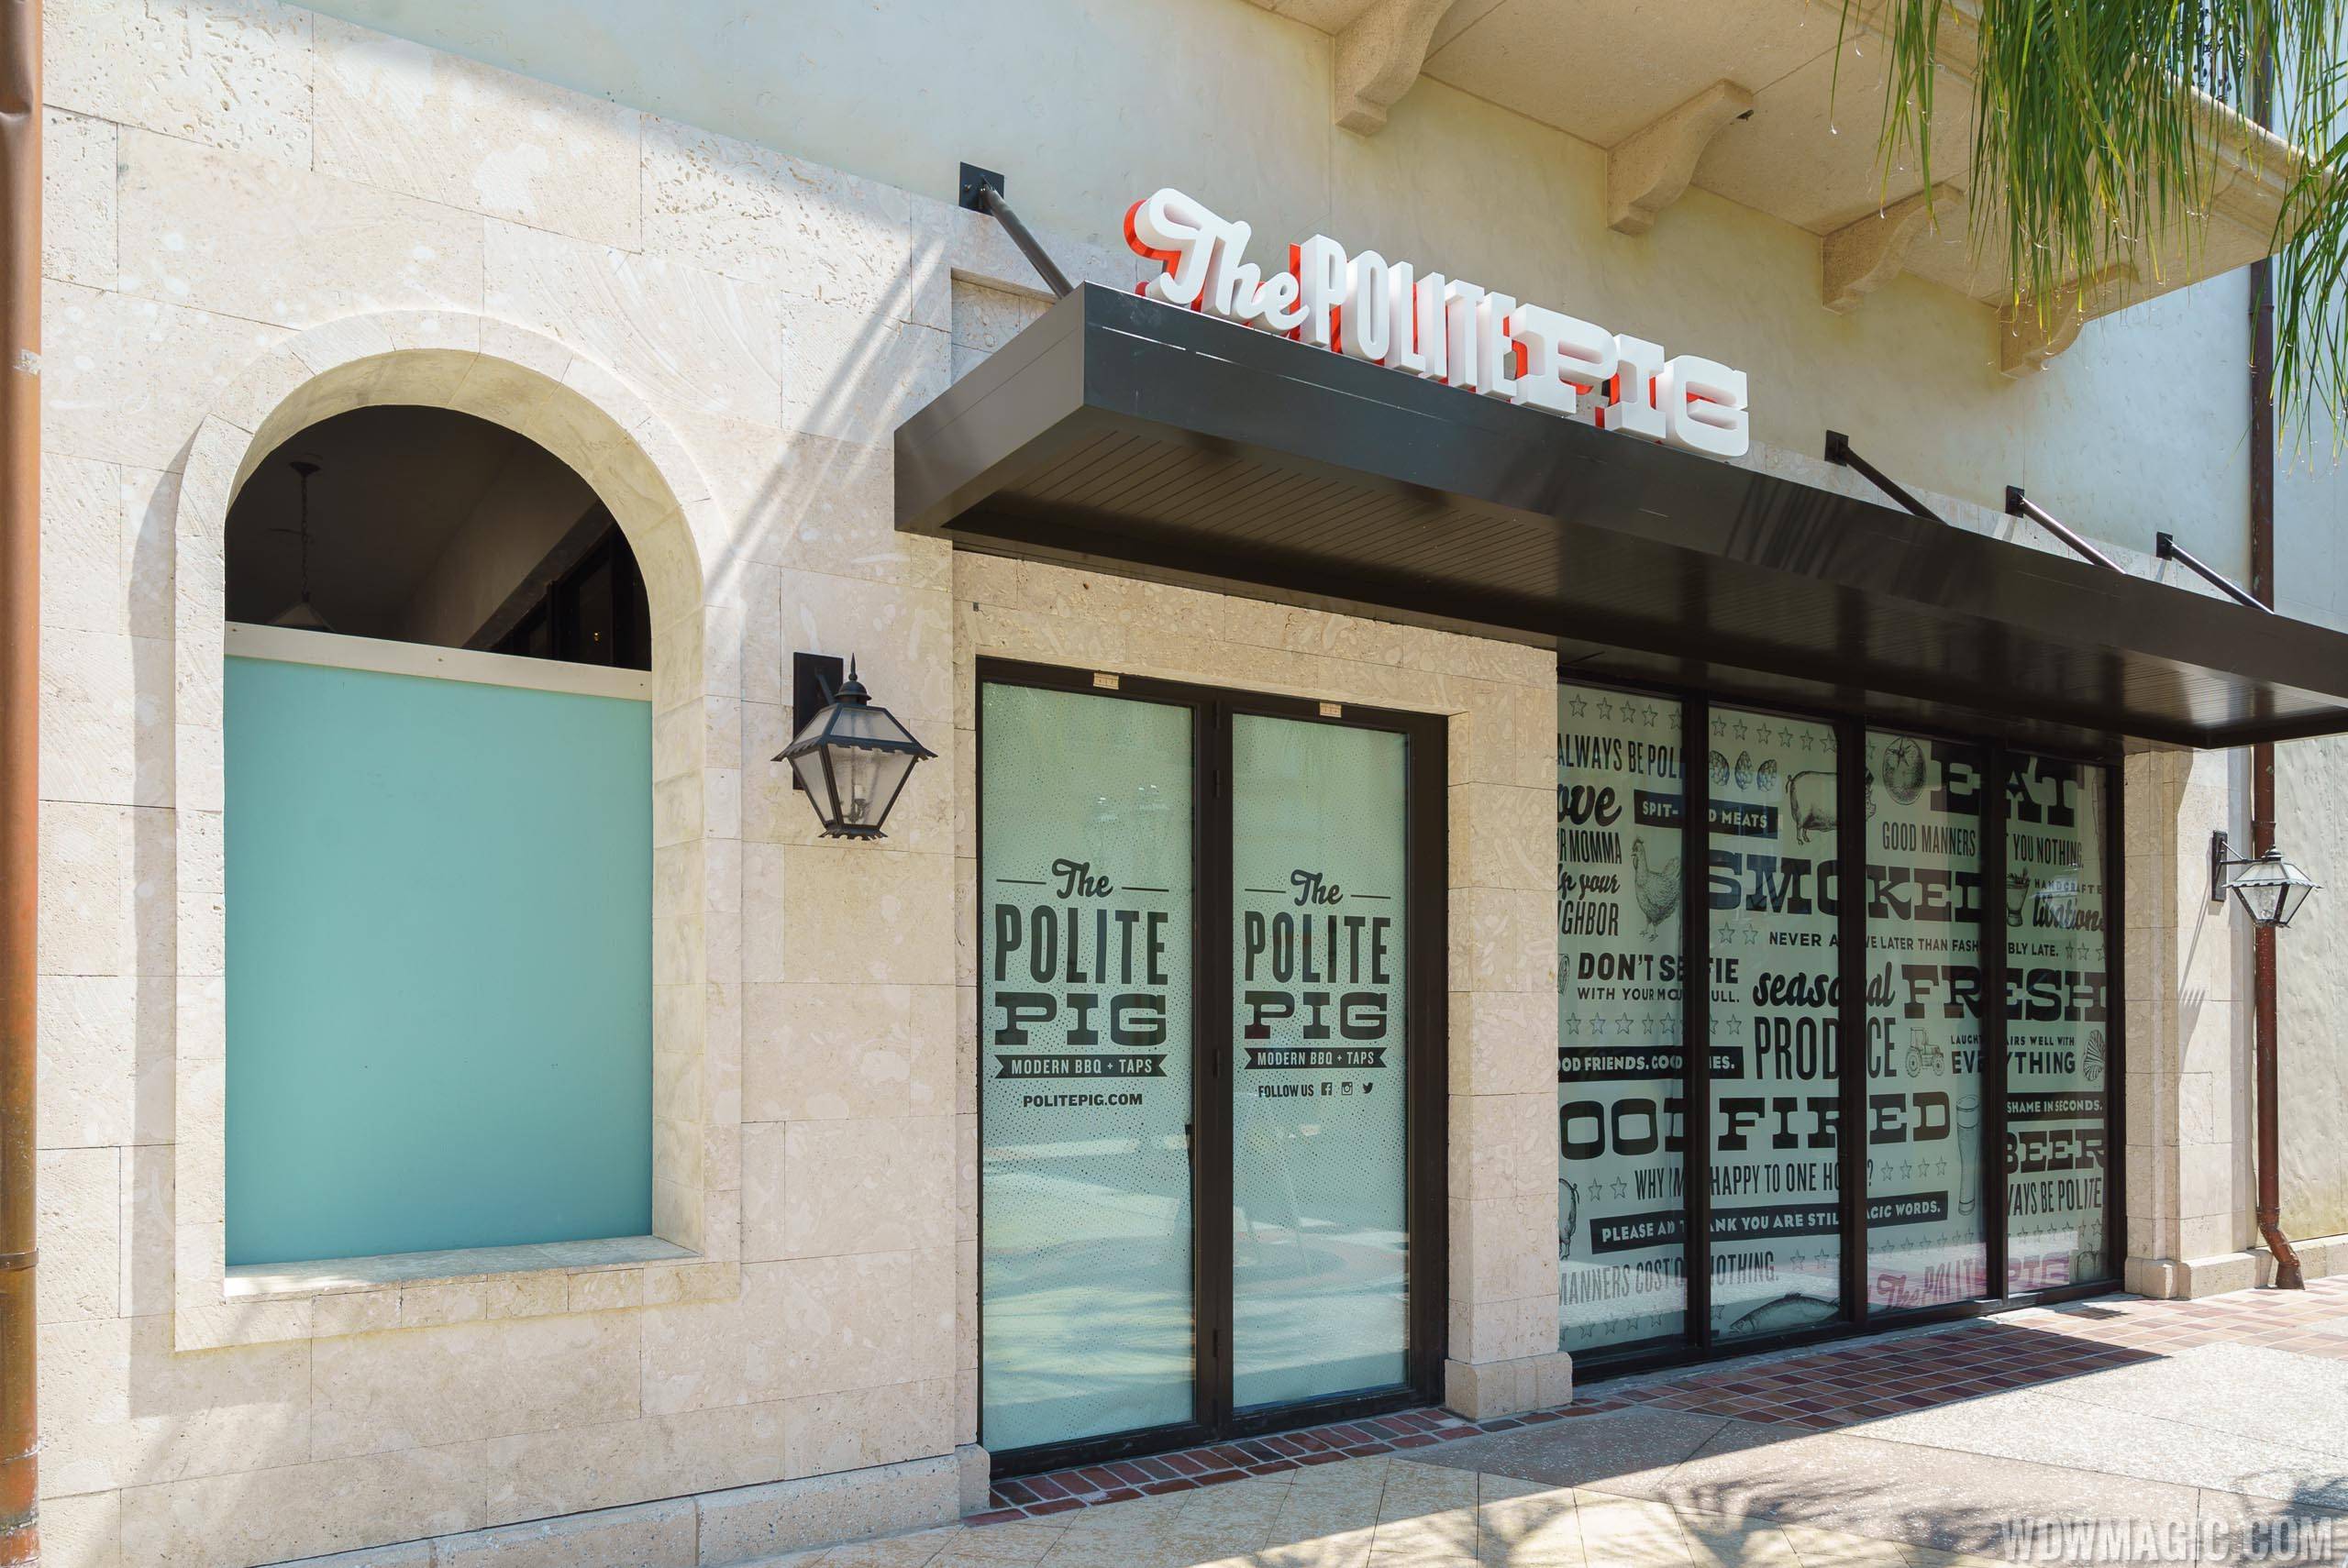 The Polite Pig opens April 10 in the Town Center at Disney Springs